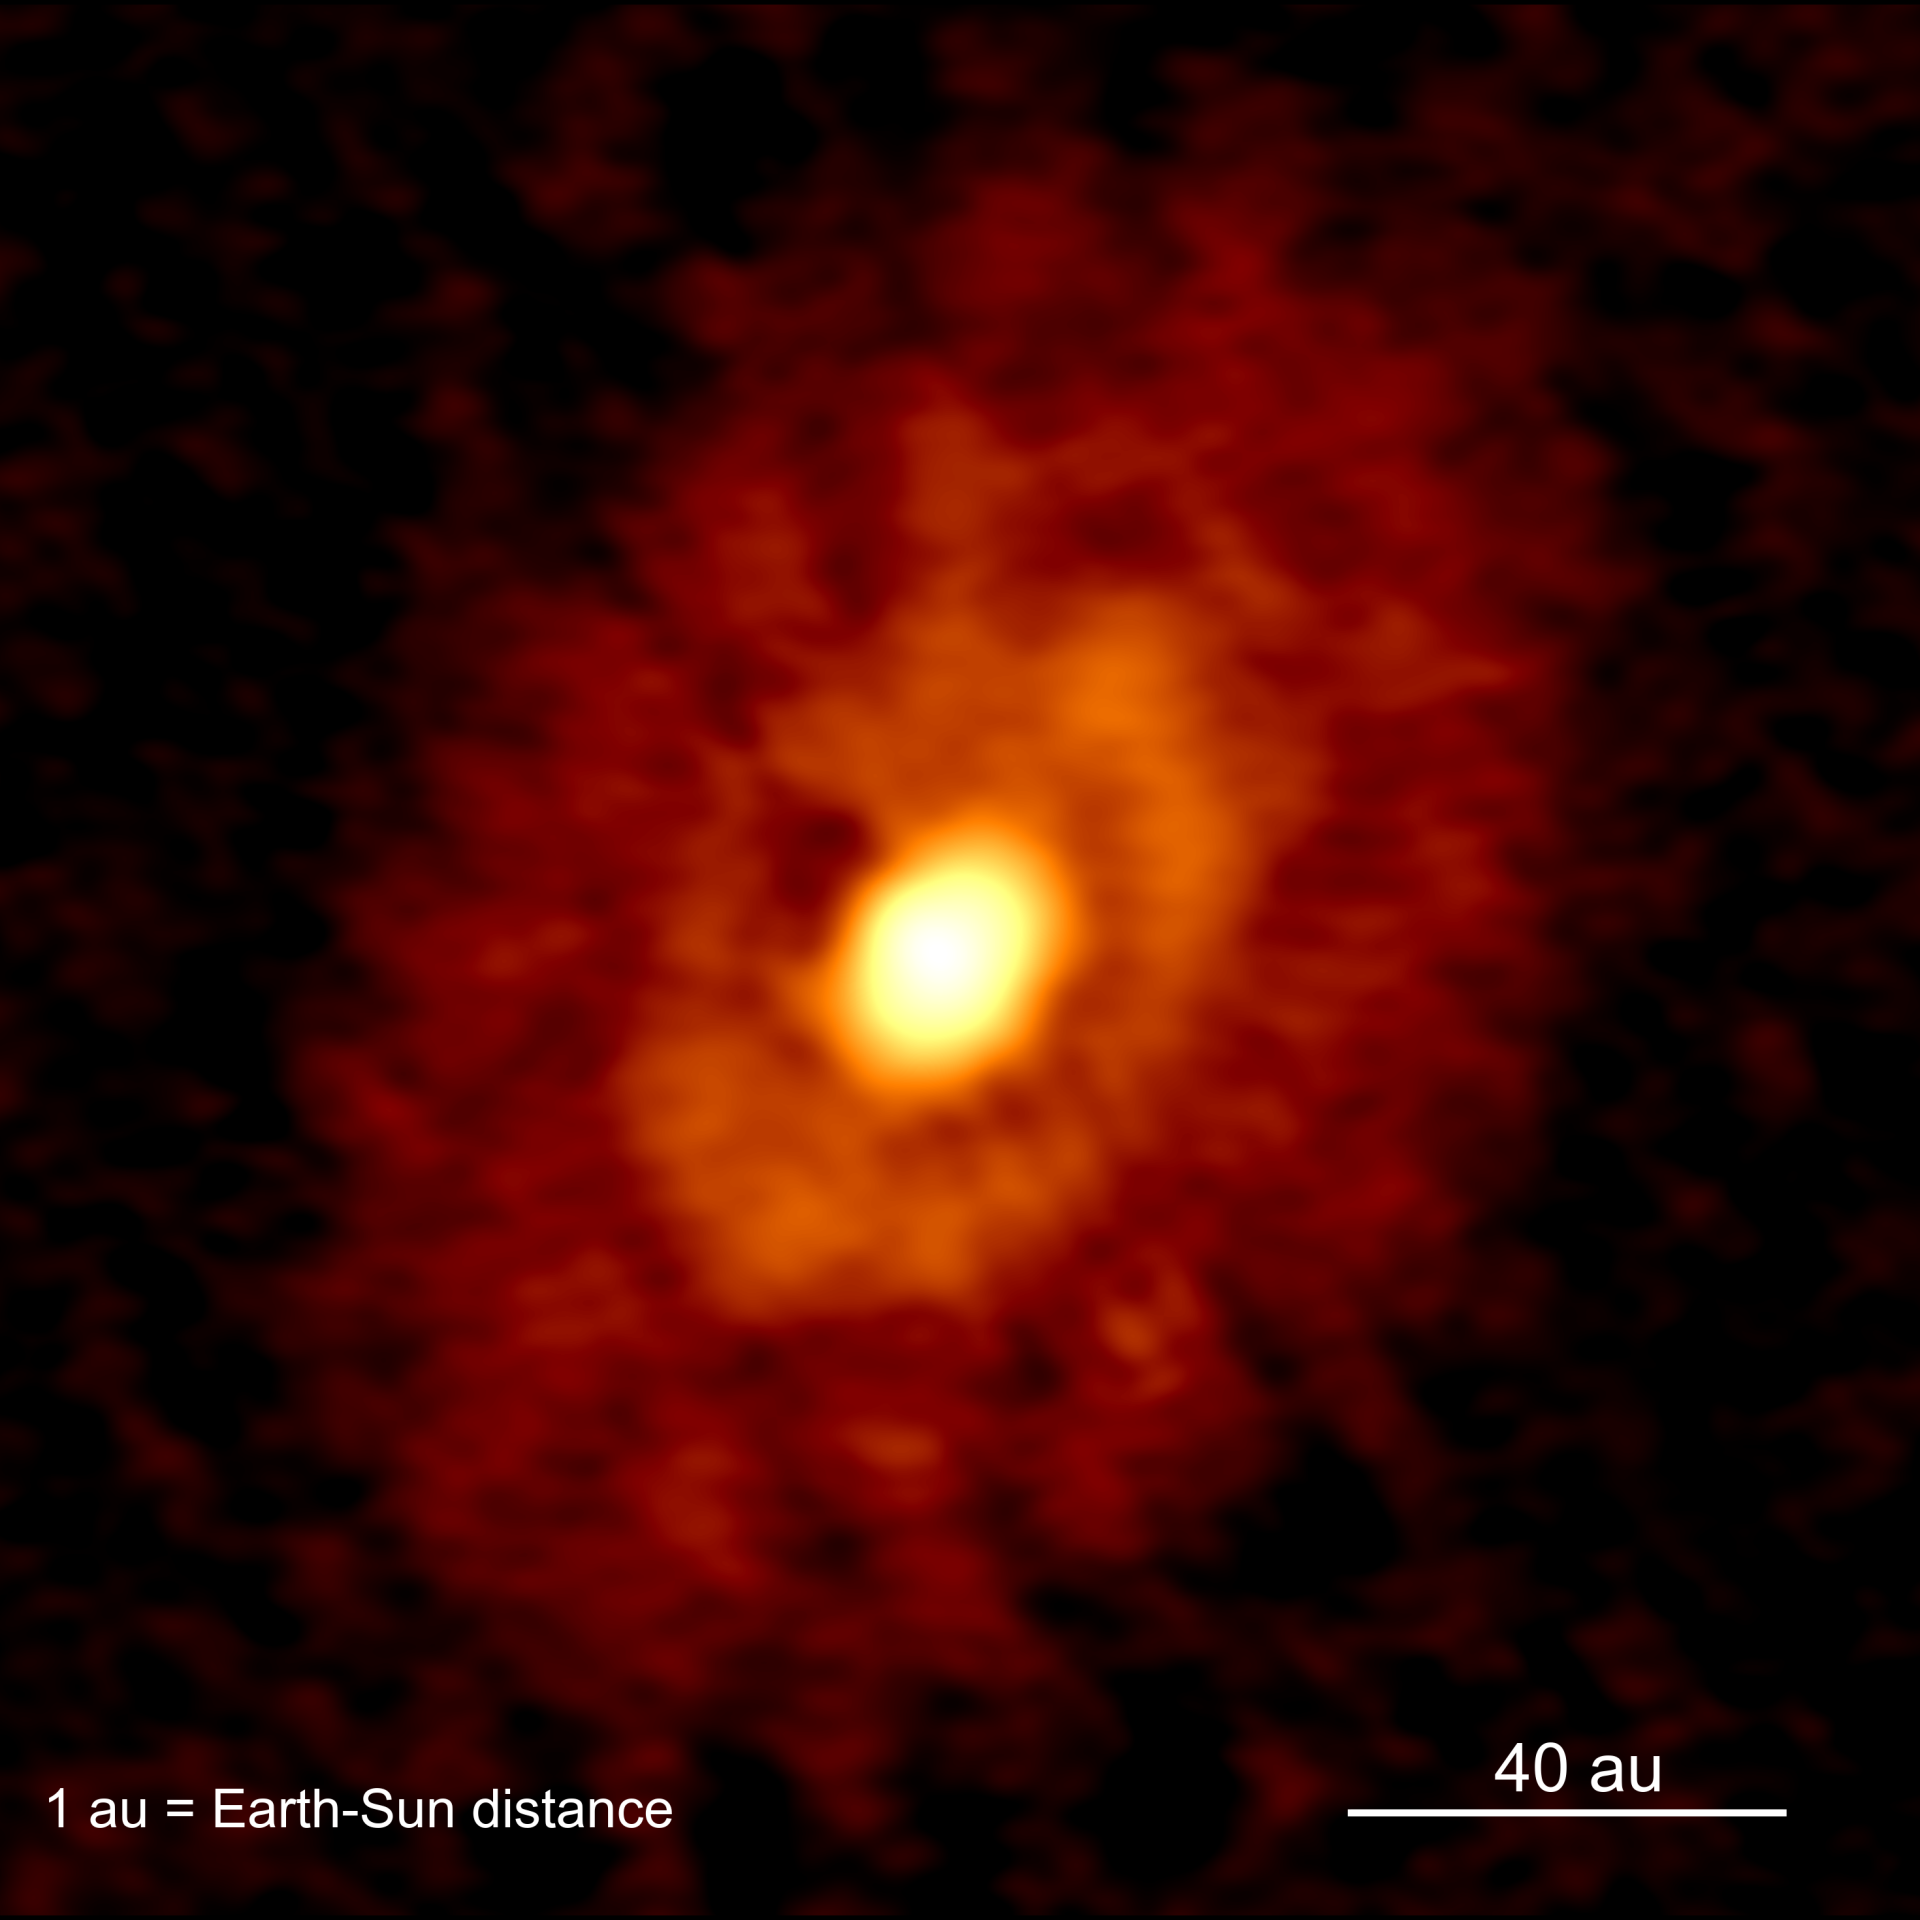 Outlandish rings round protostar suggests planets originate sooner than intention